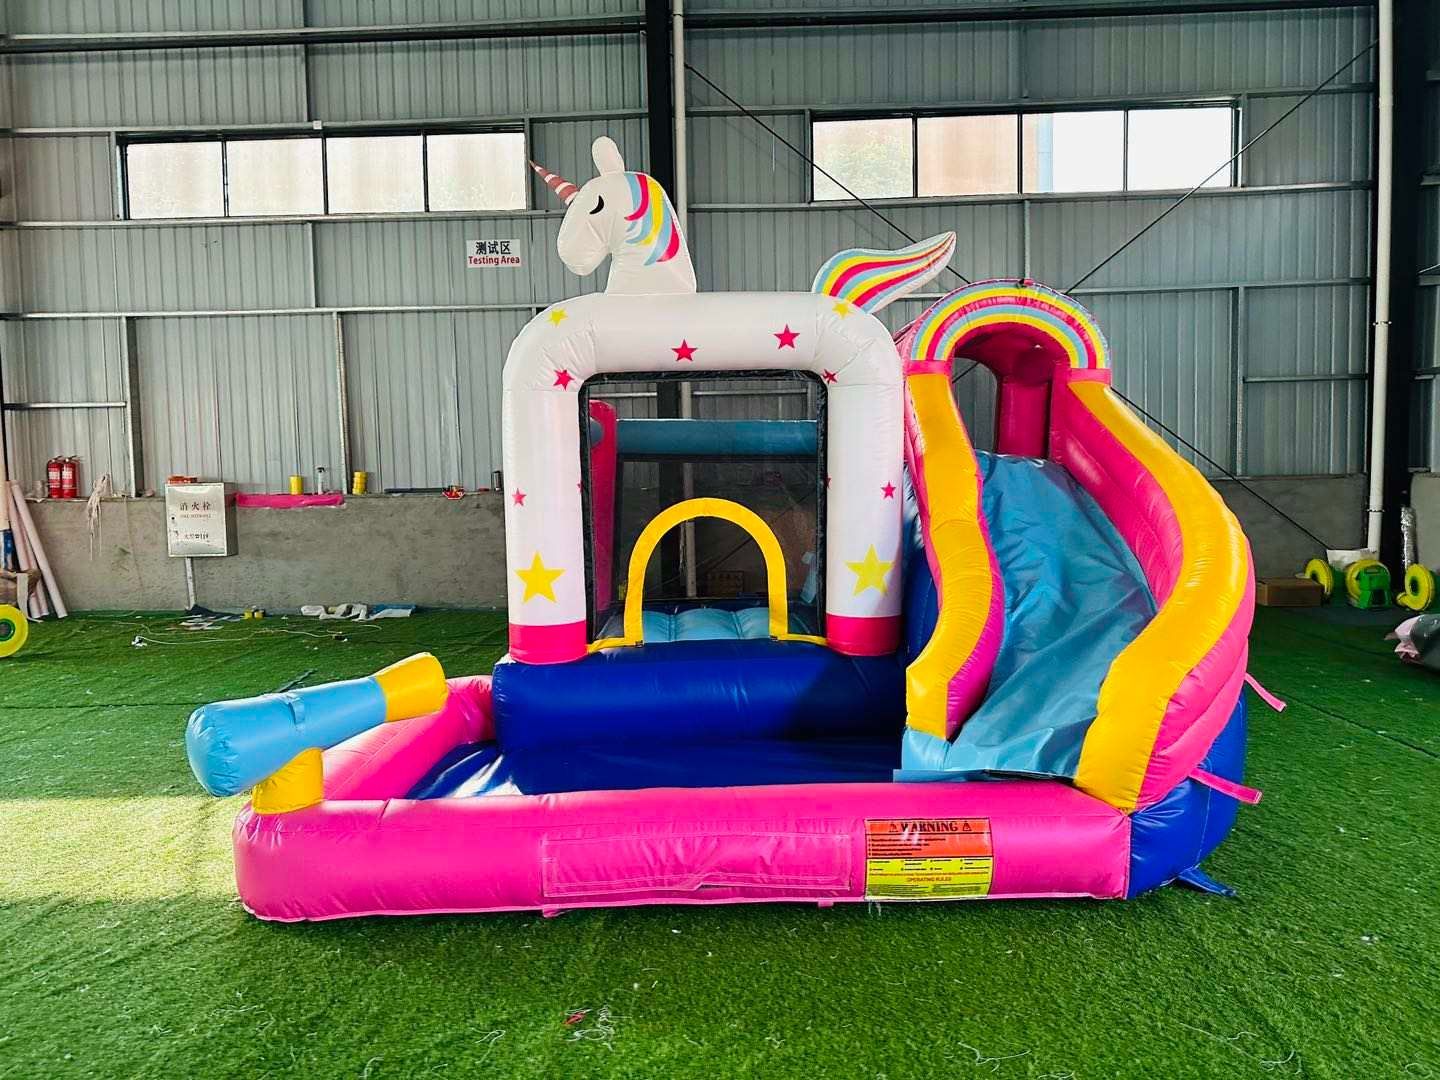 Bouncy Unicorn with Slide | Rancho Cucamonga, CA | Jam Jam Bounce House and Inflatable Party Rentals